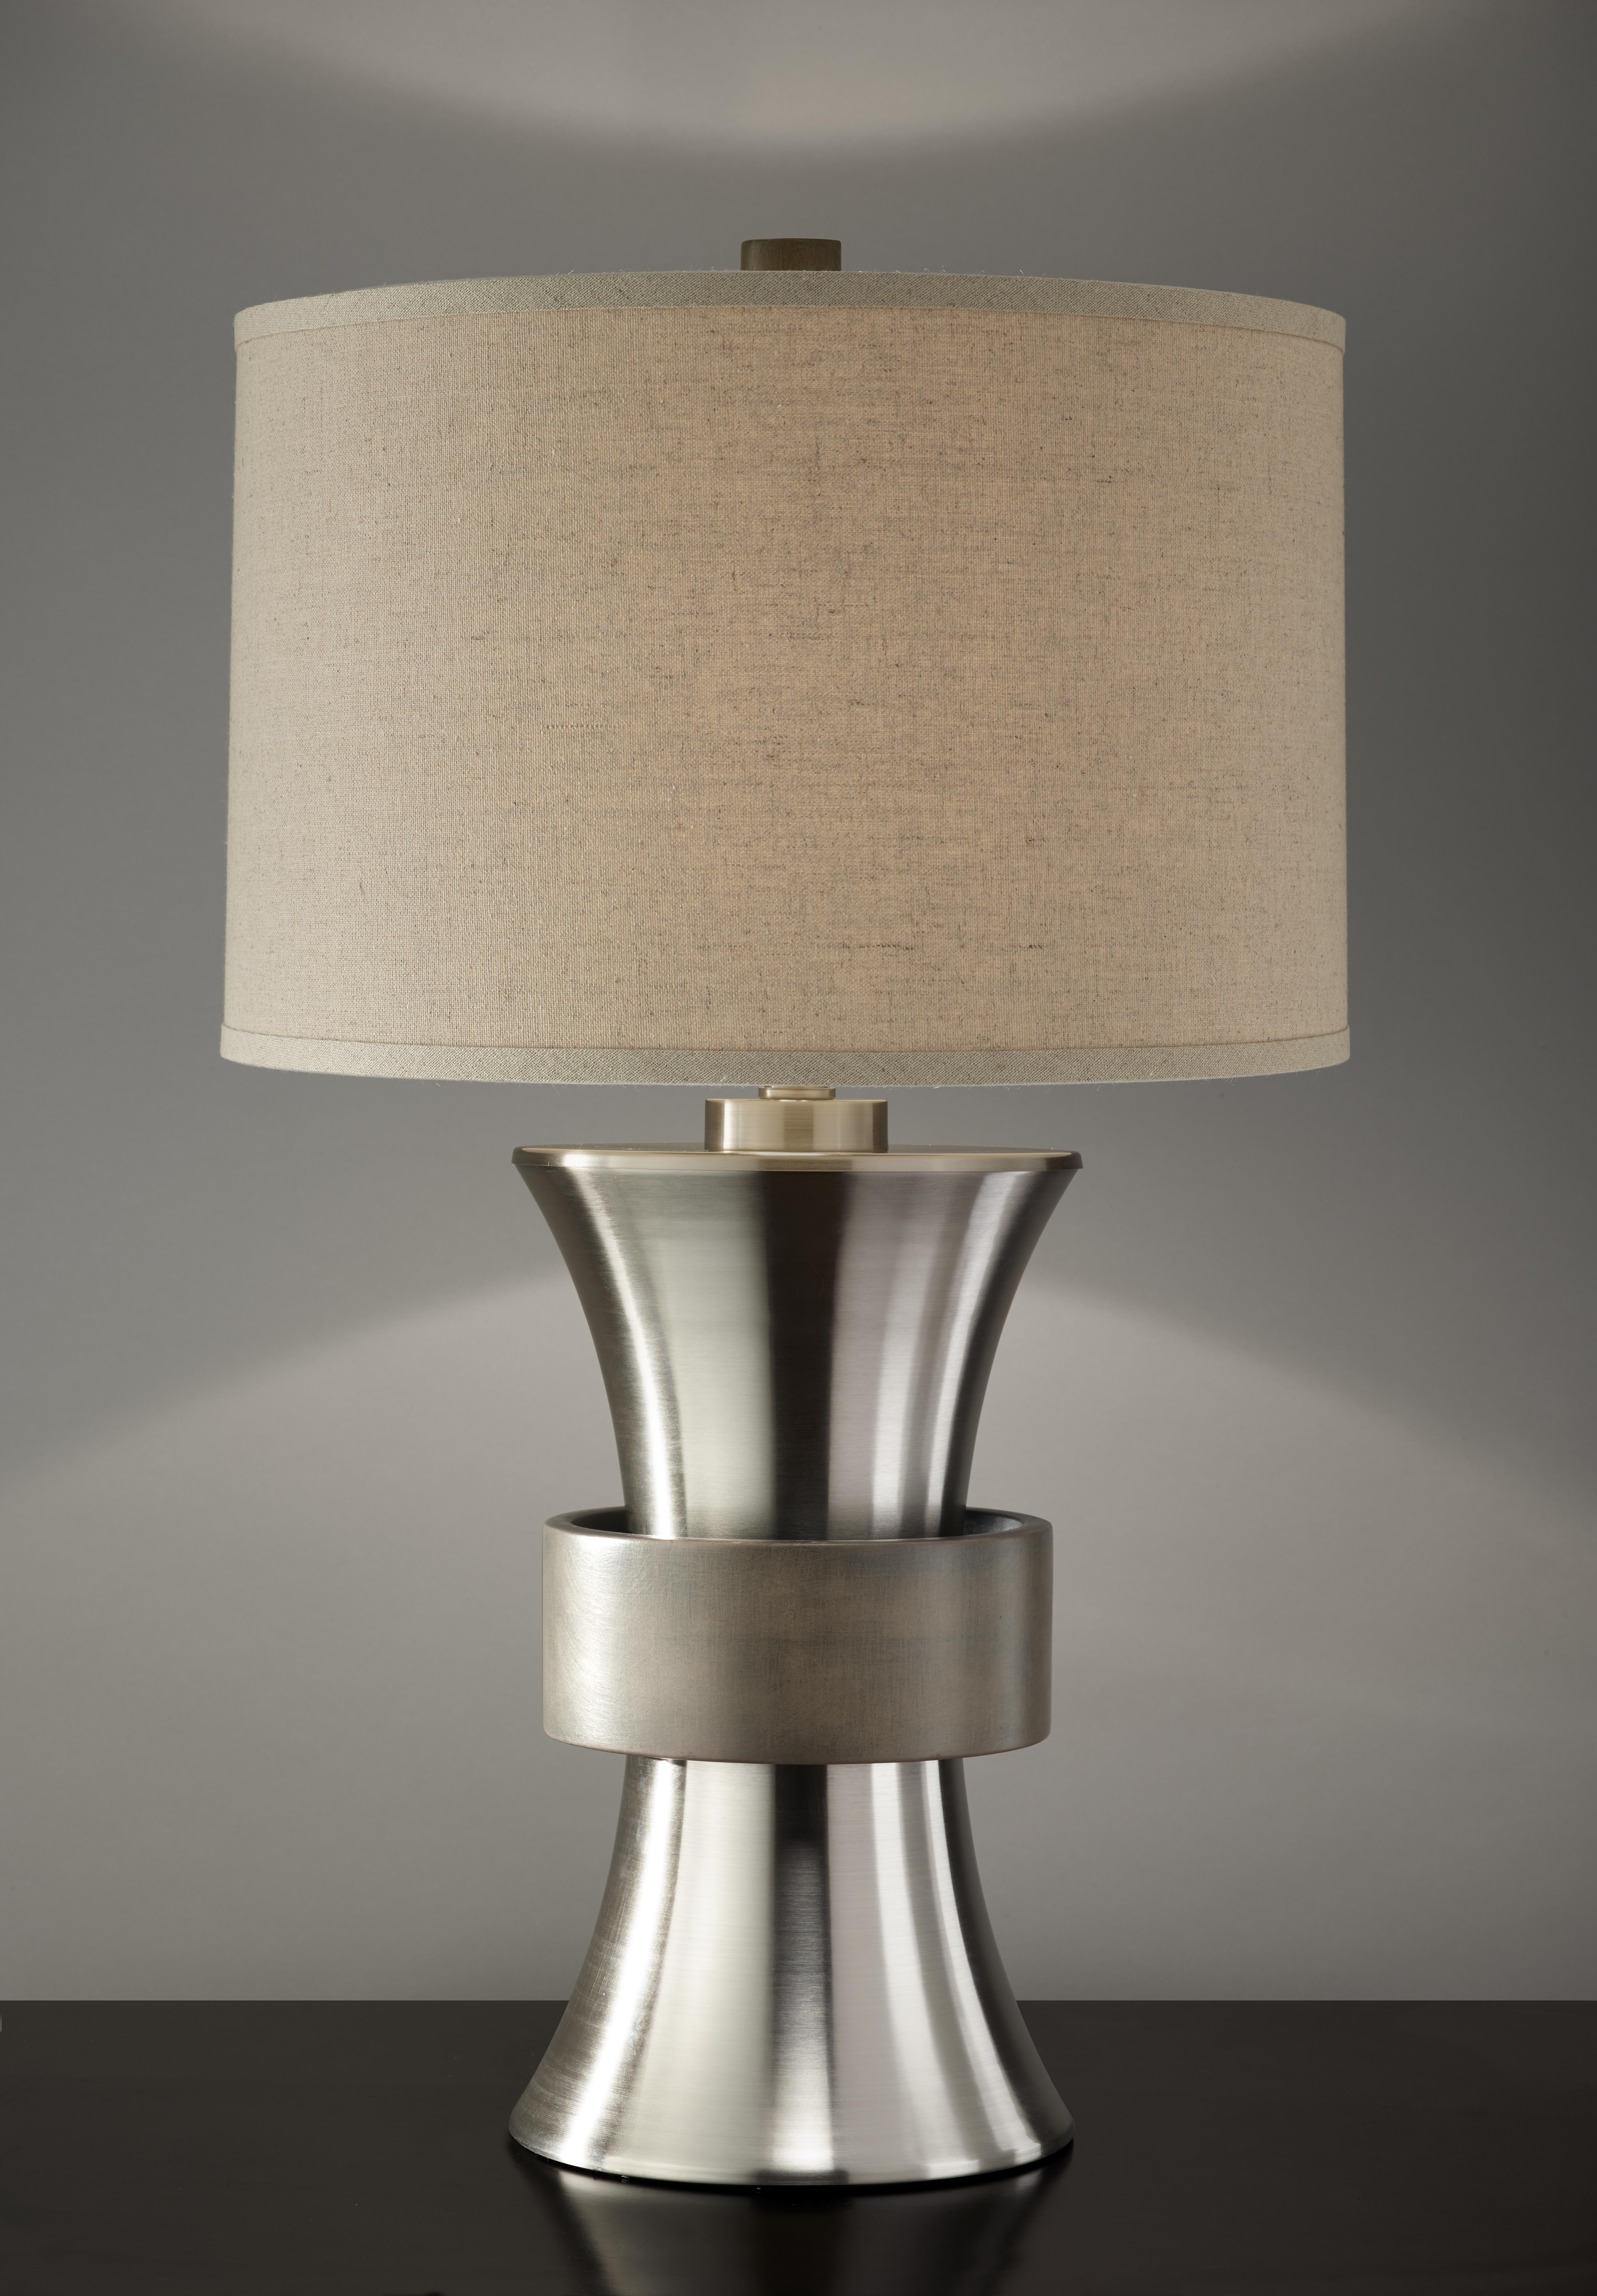 New Table Lamps | Fresh Furniture